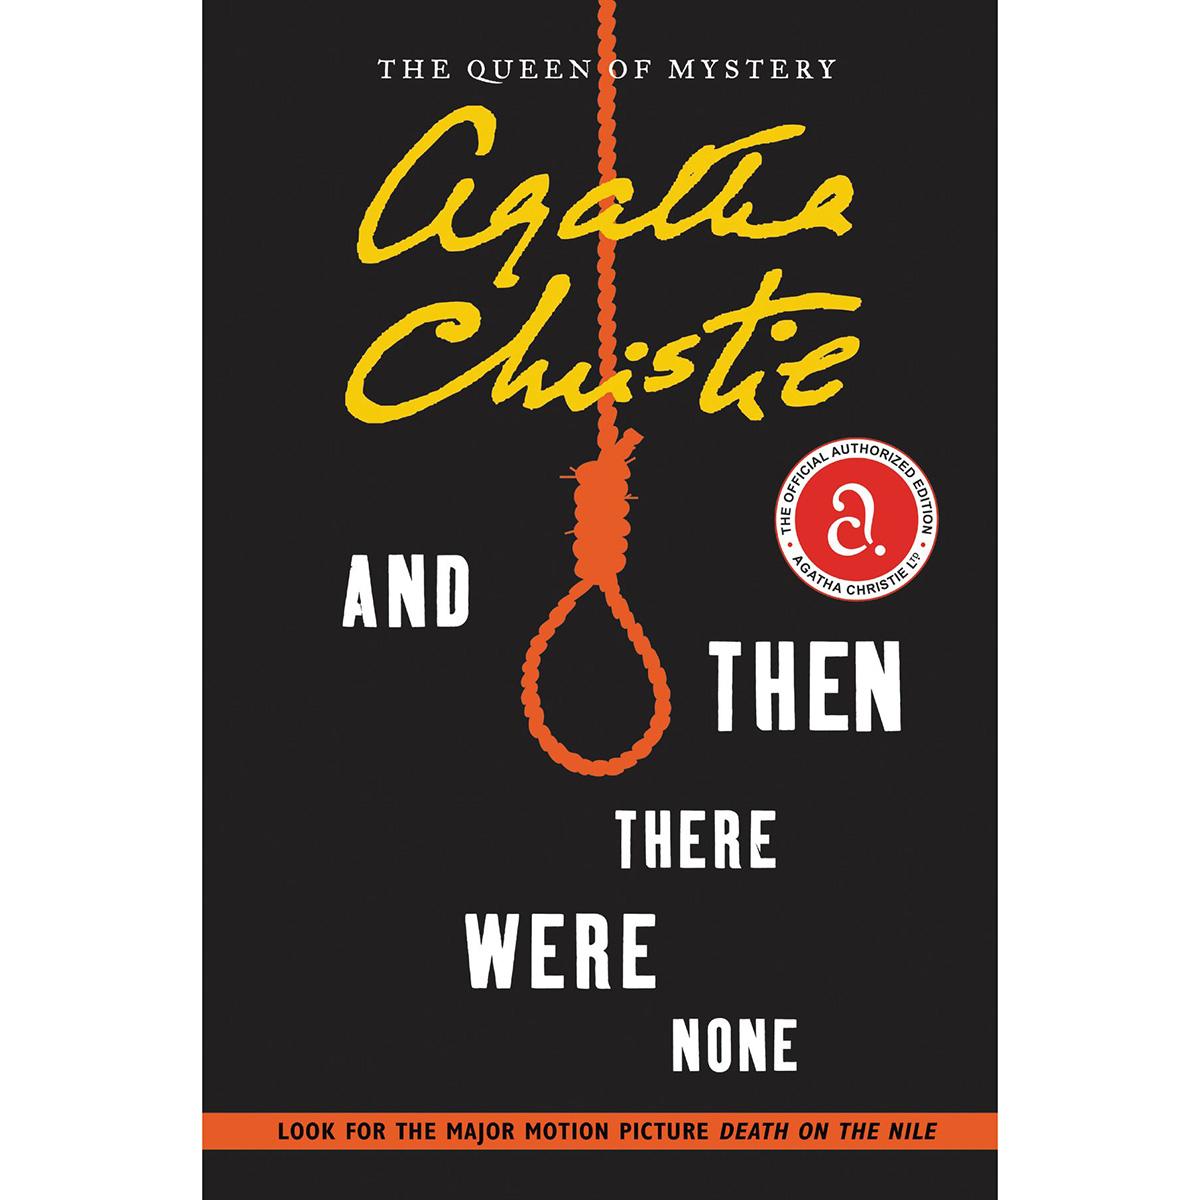 And Then There Were None Agatha Christie eBook for $1.99